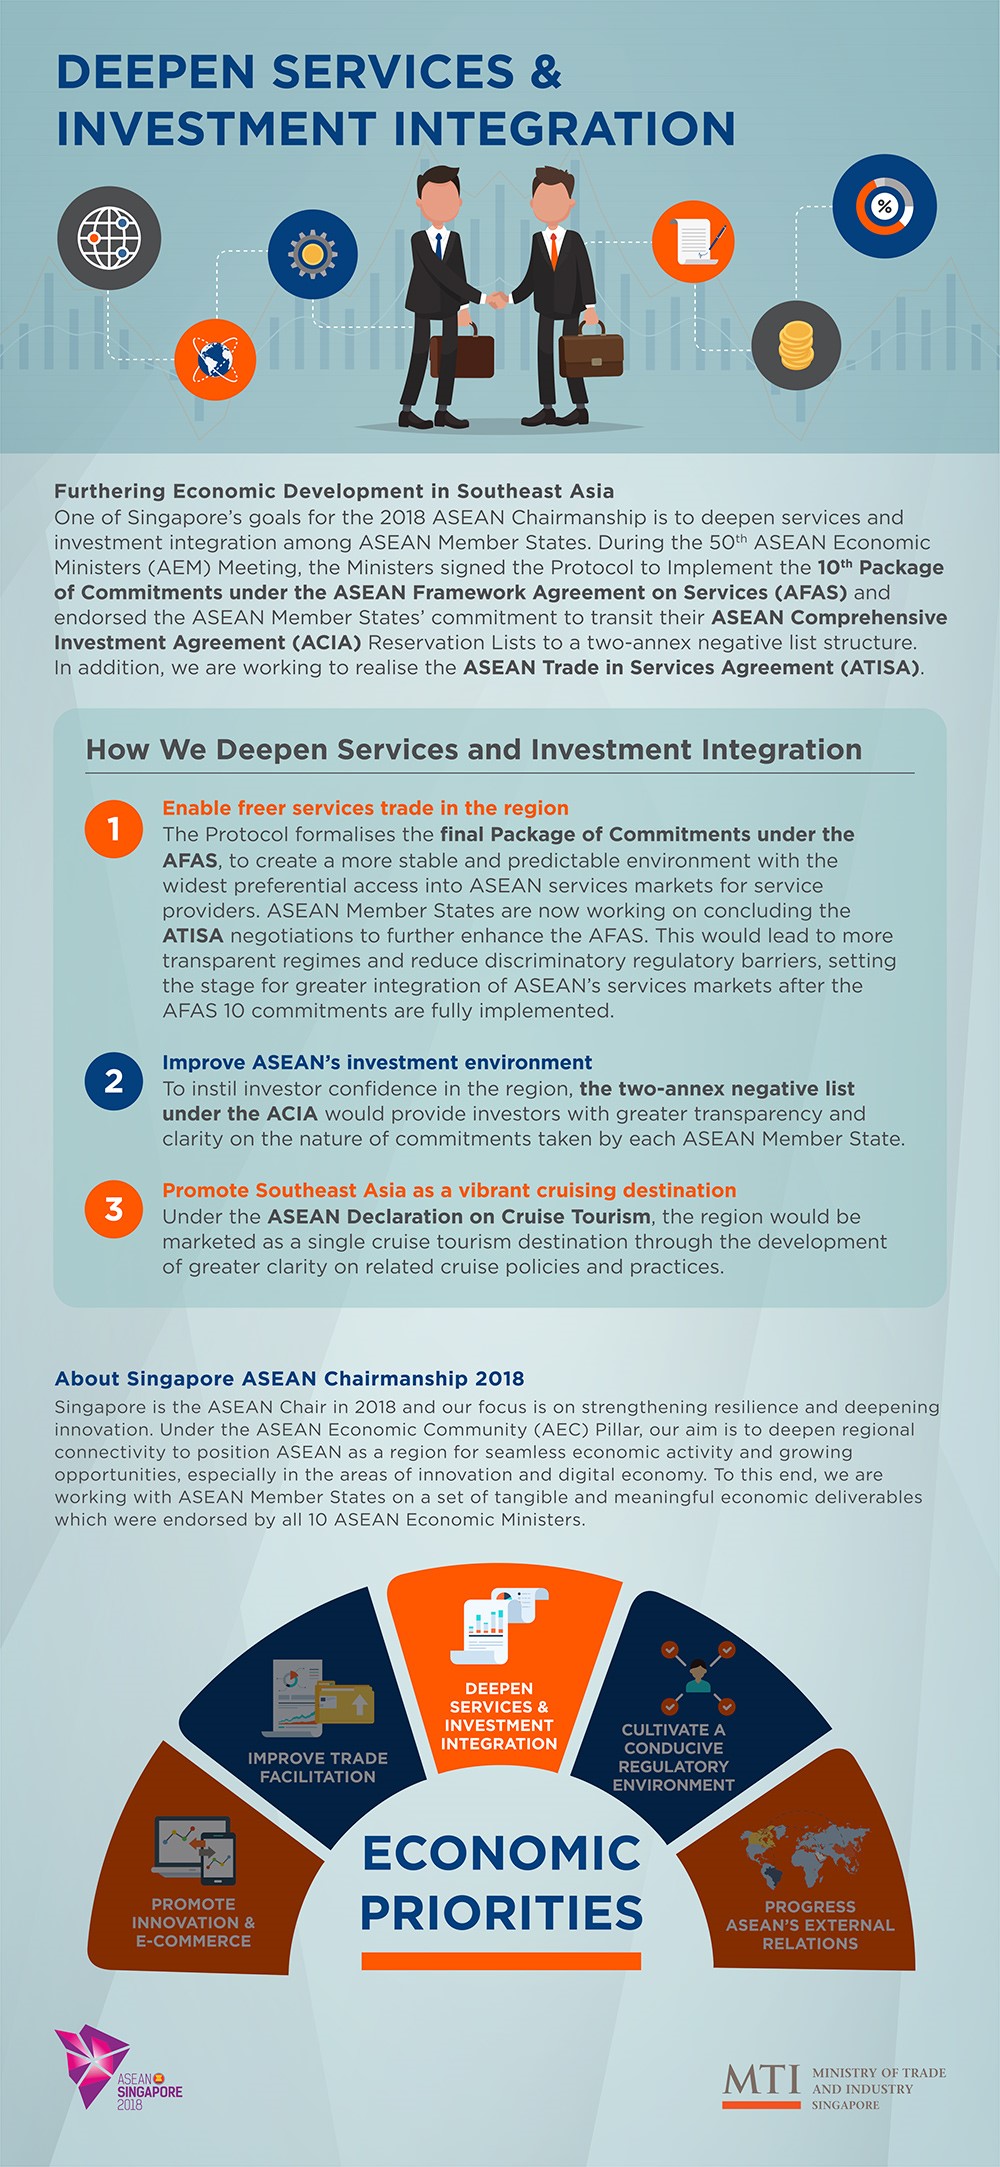 ASEAN 2018 Singapore Chairmanship: How We Deepen Services and Investment Integration